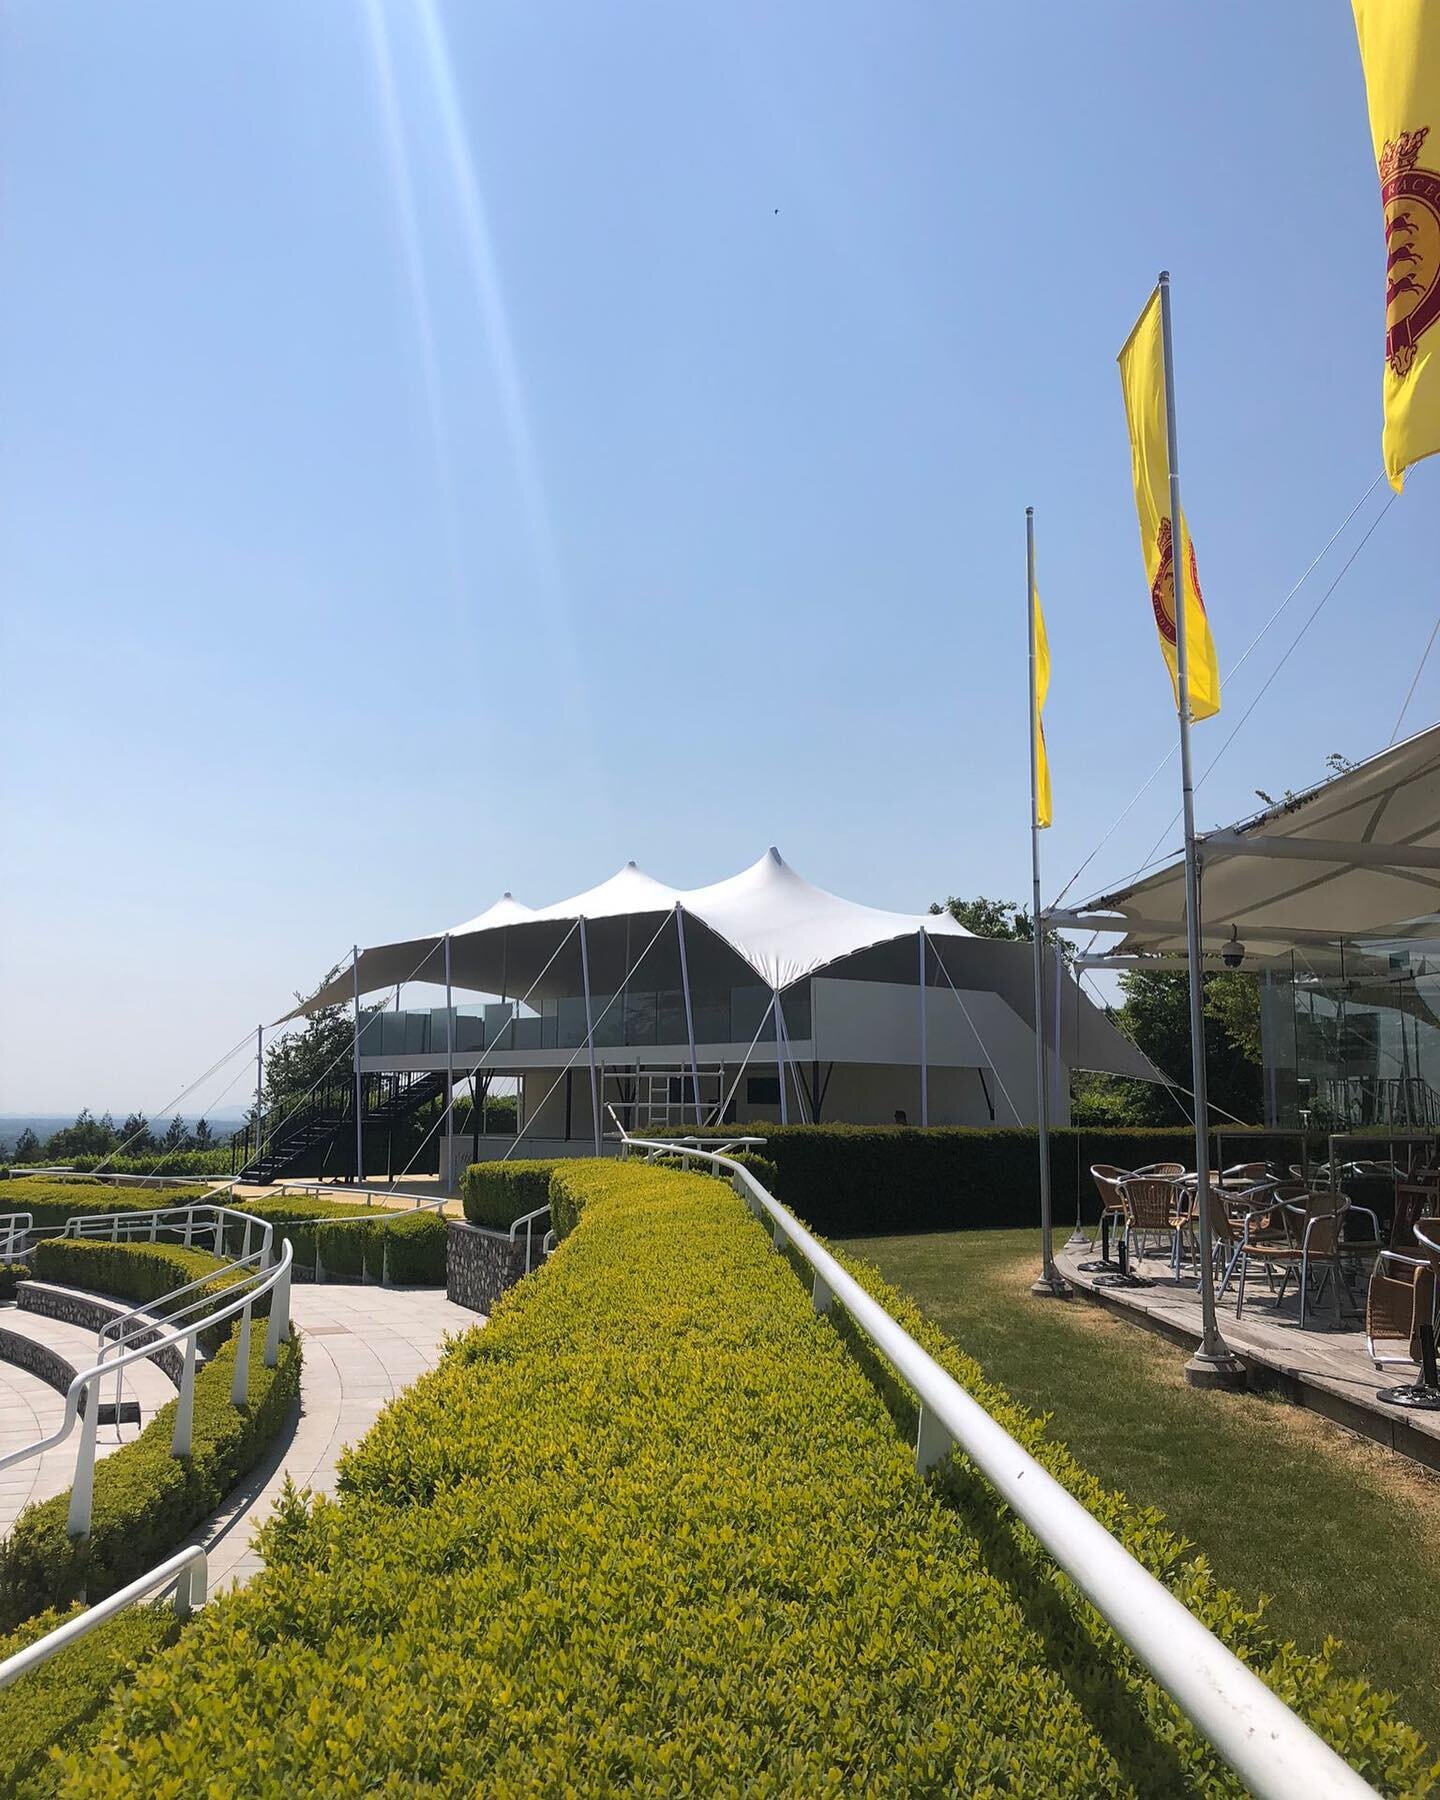 Stunning day for it down at @goodwood_races, working with @halogroupcreative installing a 18m x 10.5m over their two tier decking system. 

.

.

.

#stretchtent #Stretchtents #RHI  #marquee #temporarystructure #Eventprofs #canopy #festivaltent #even